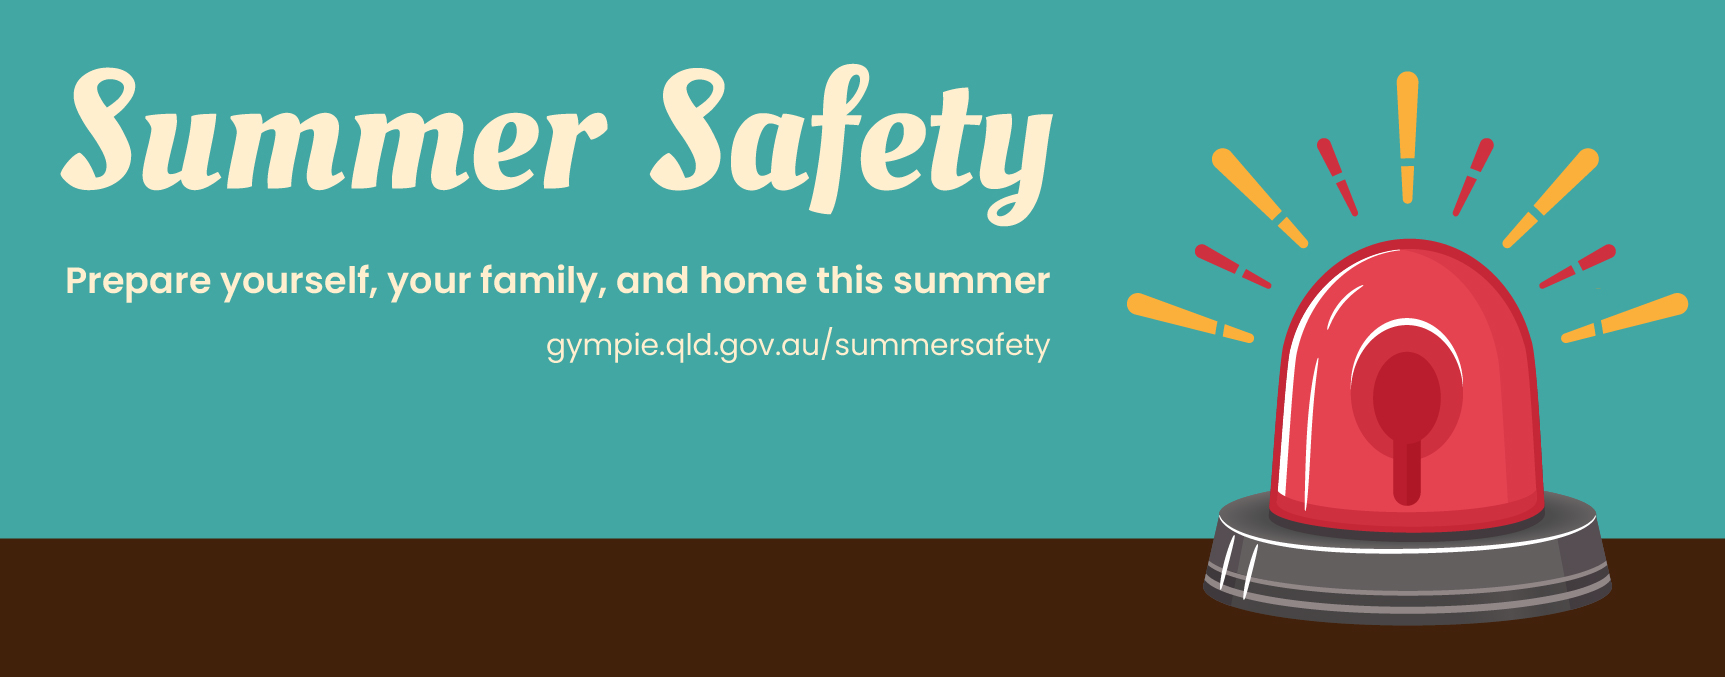 Summer safety generic fb cover